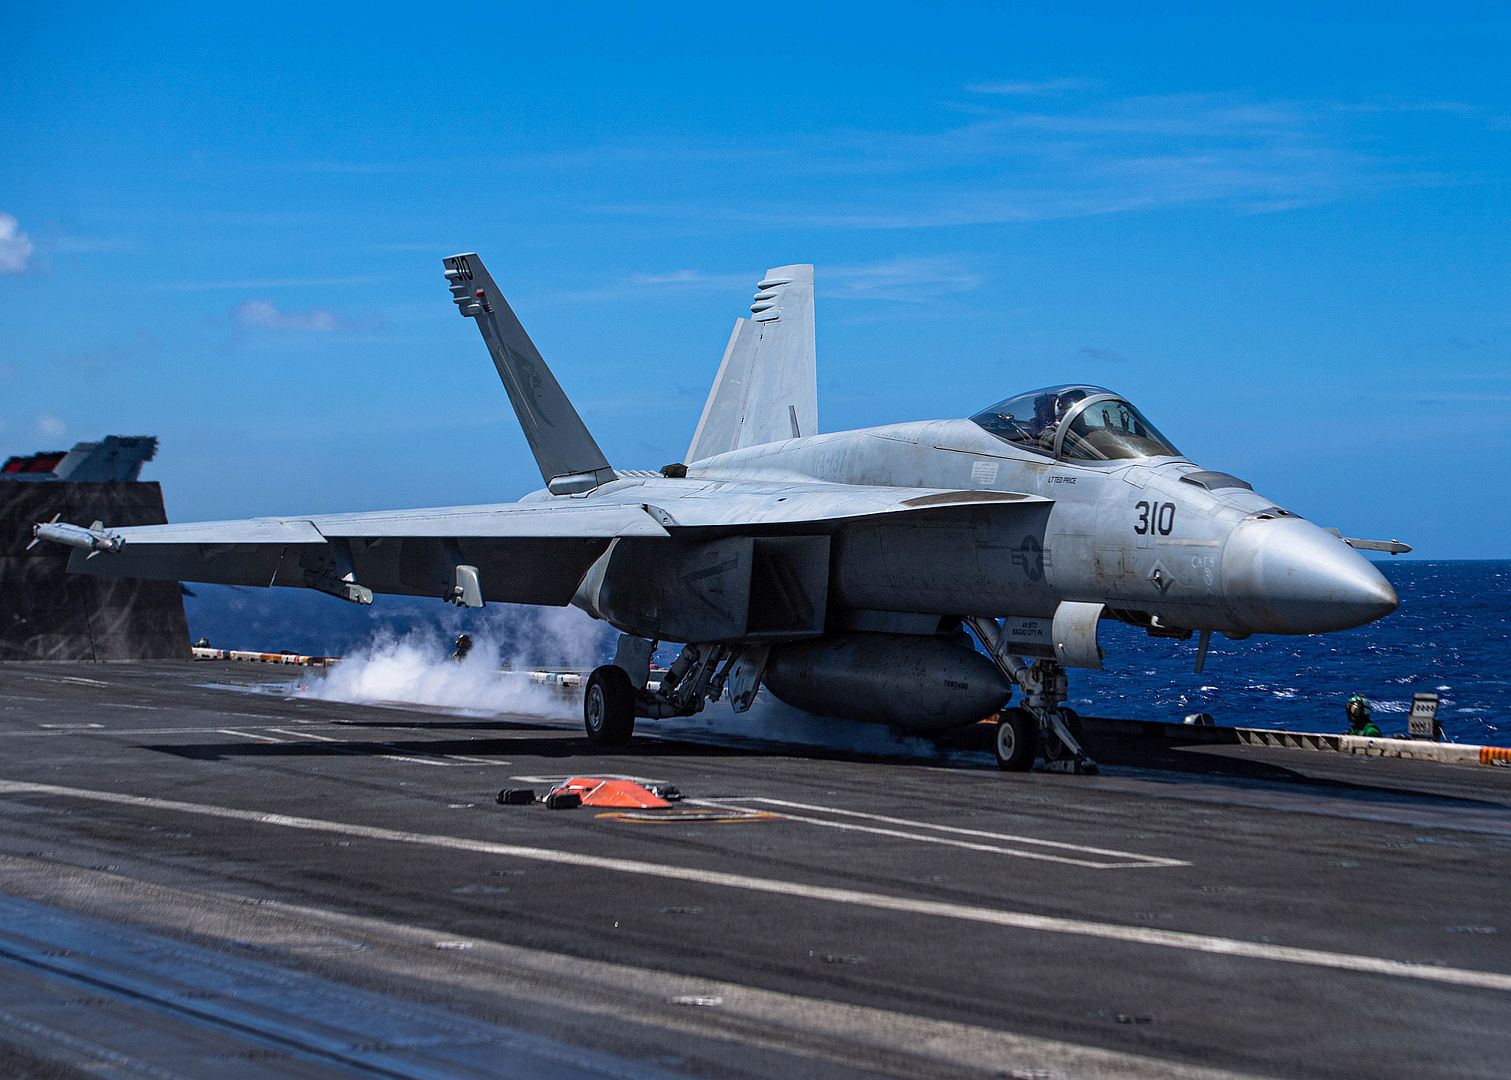  137 Launches From The Flight Deck Of The Aircraft Carrier USS Nimitz